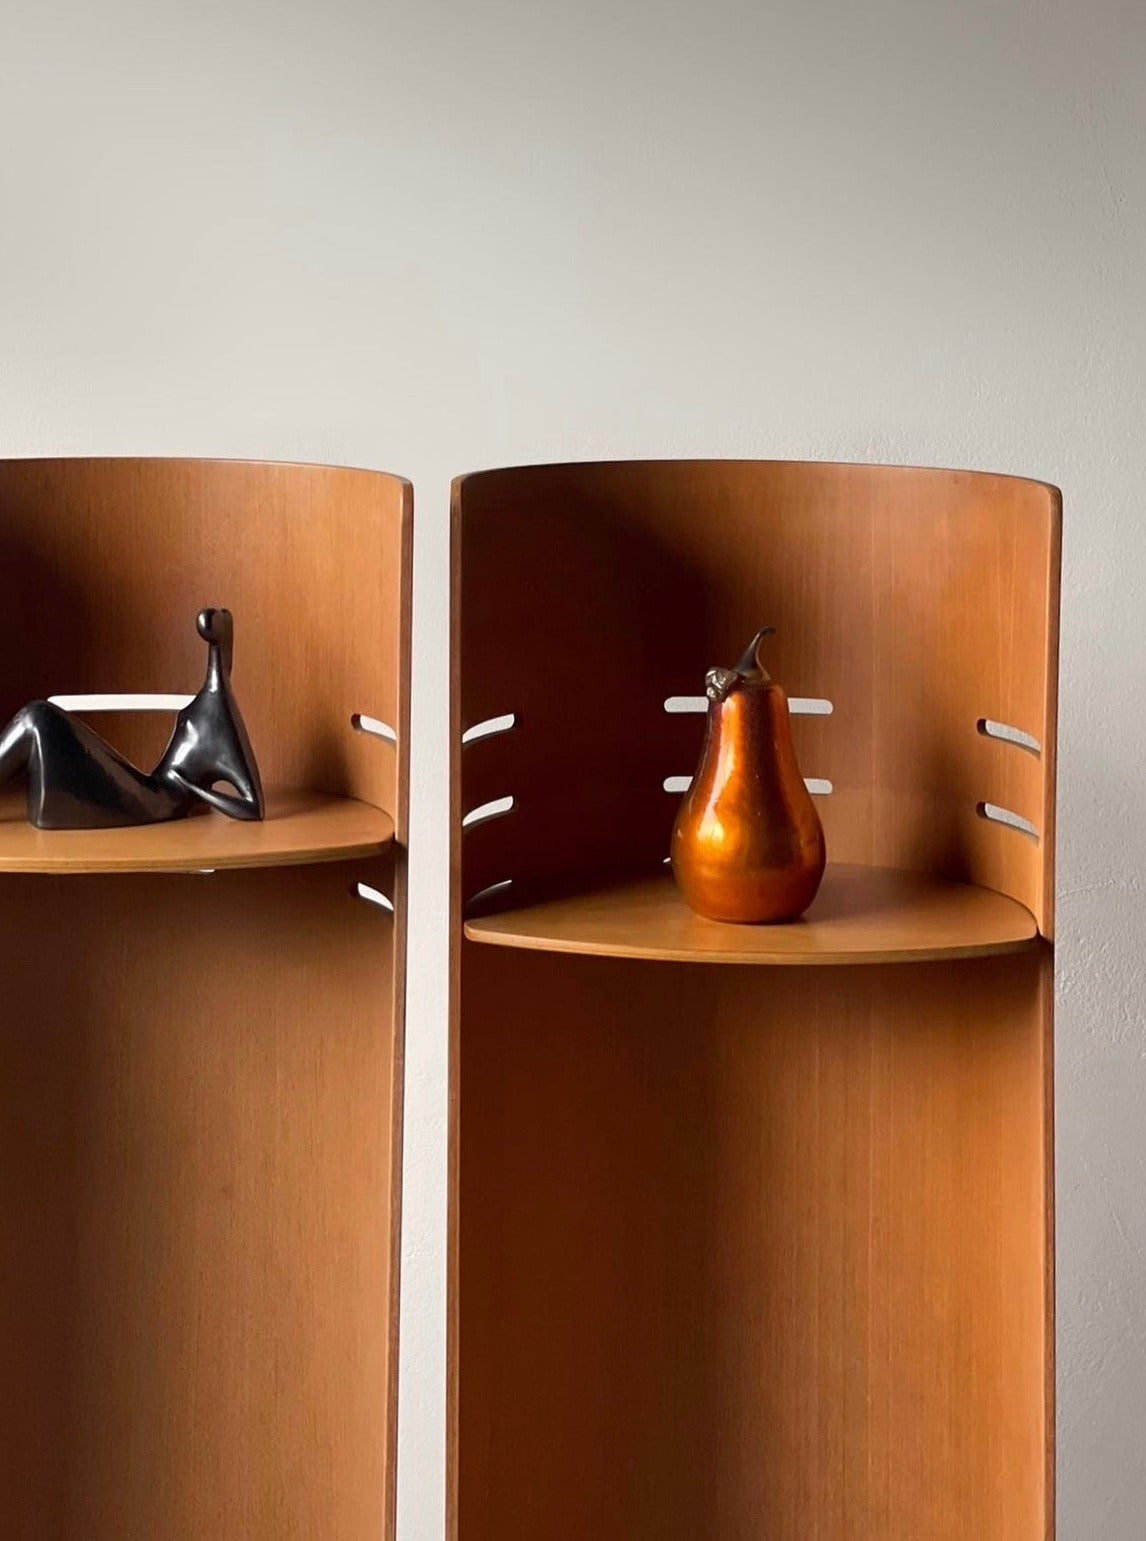 A pair of bend plywood bookcase by Kristian Solmer Vedel